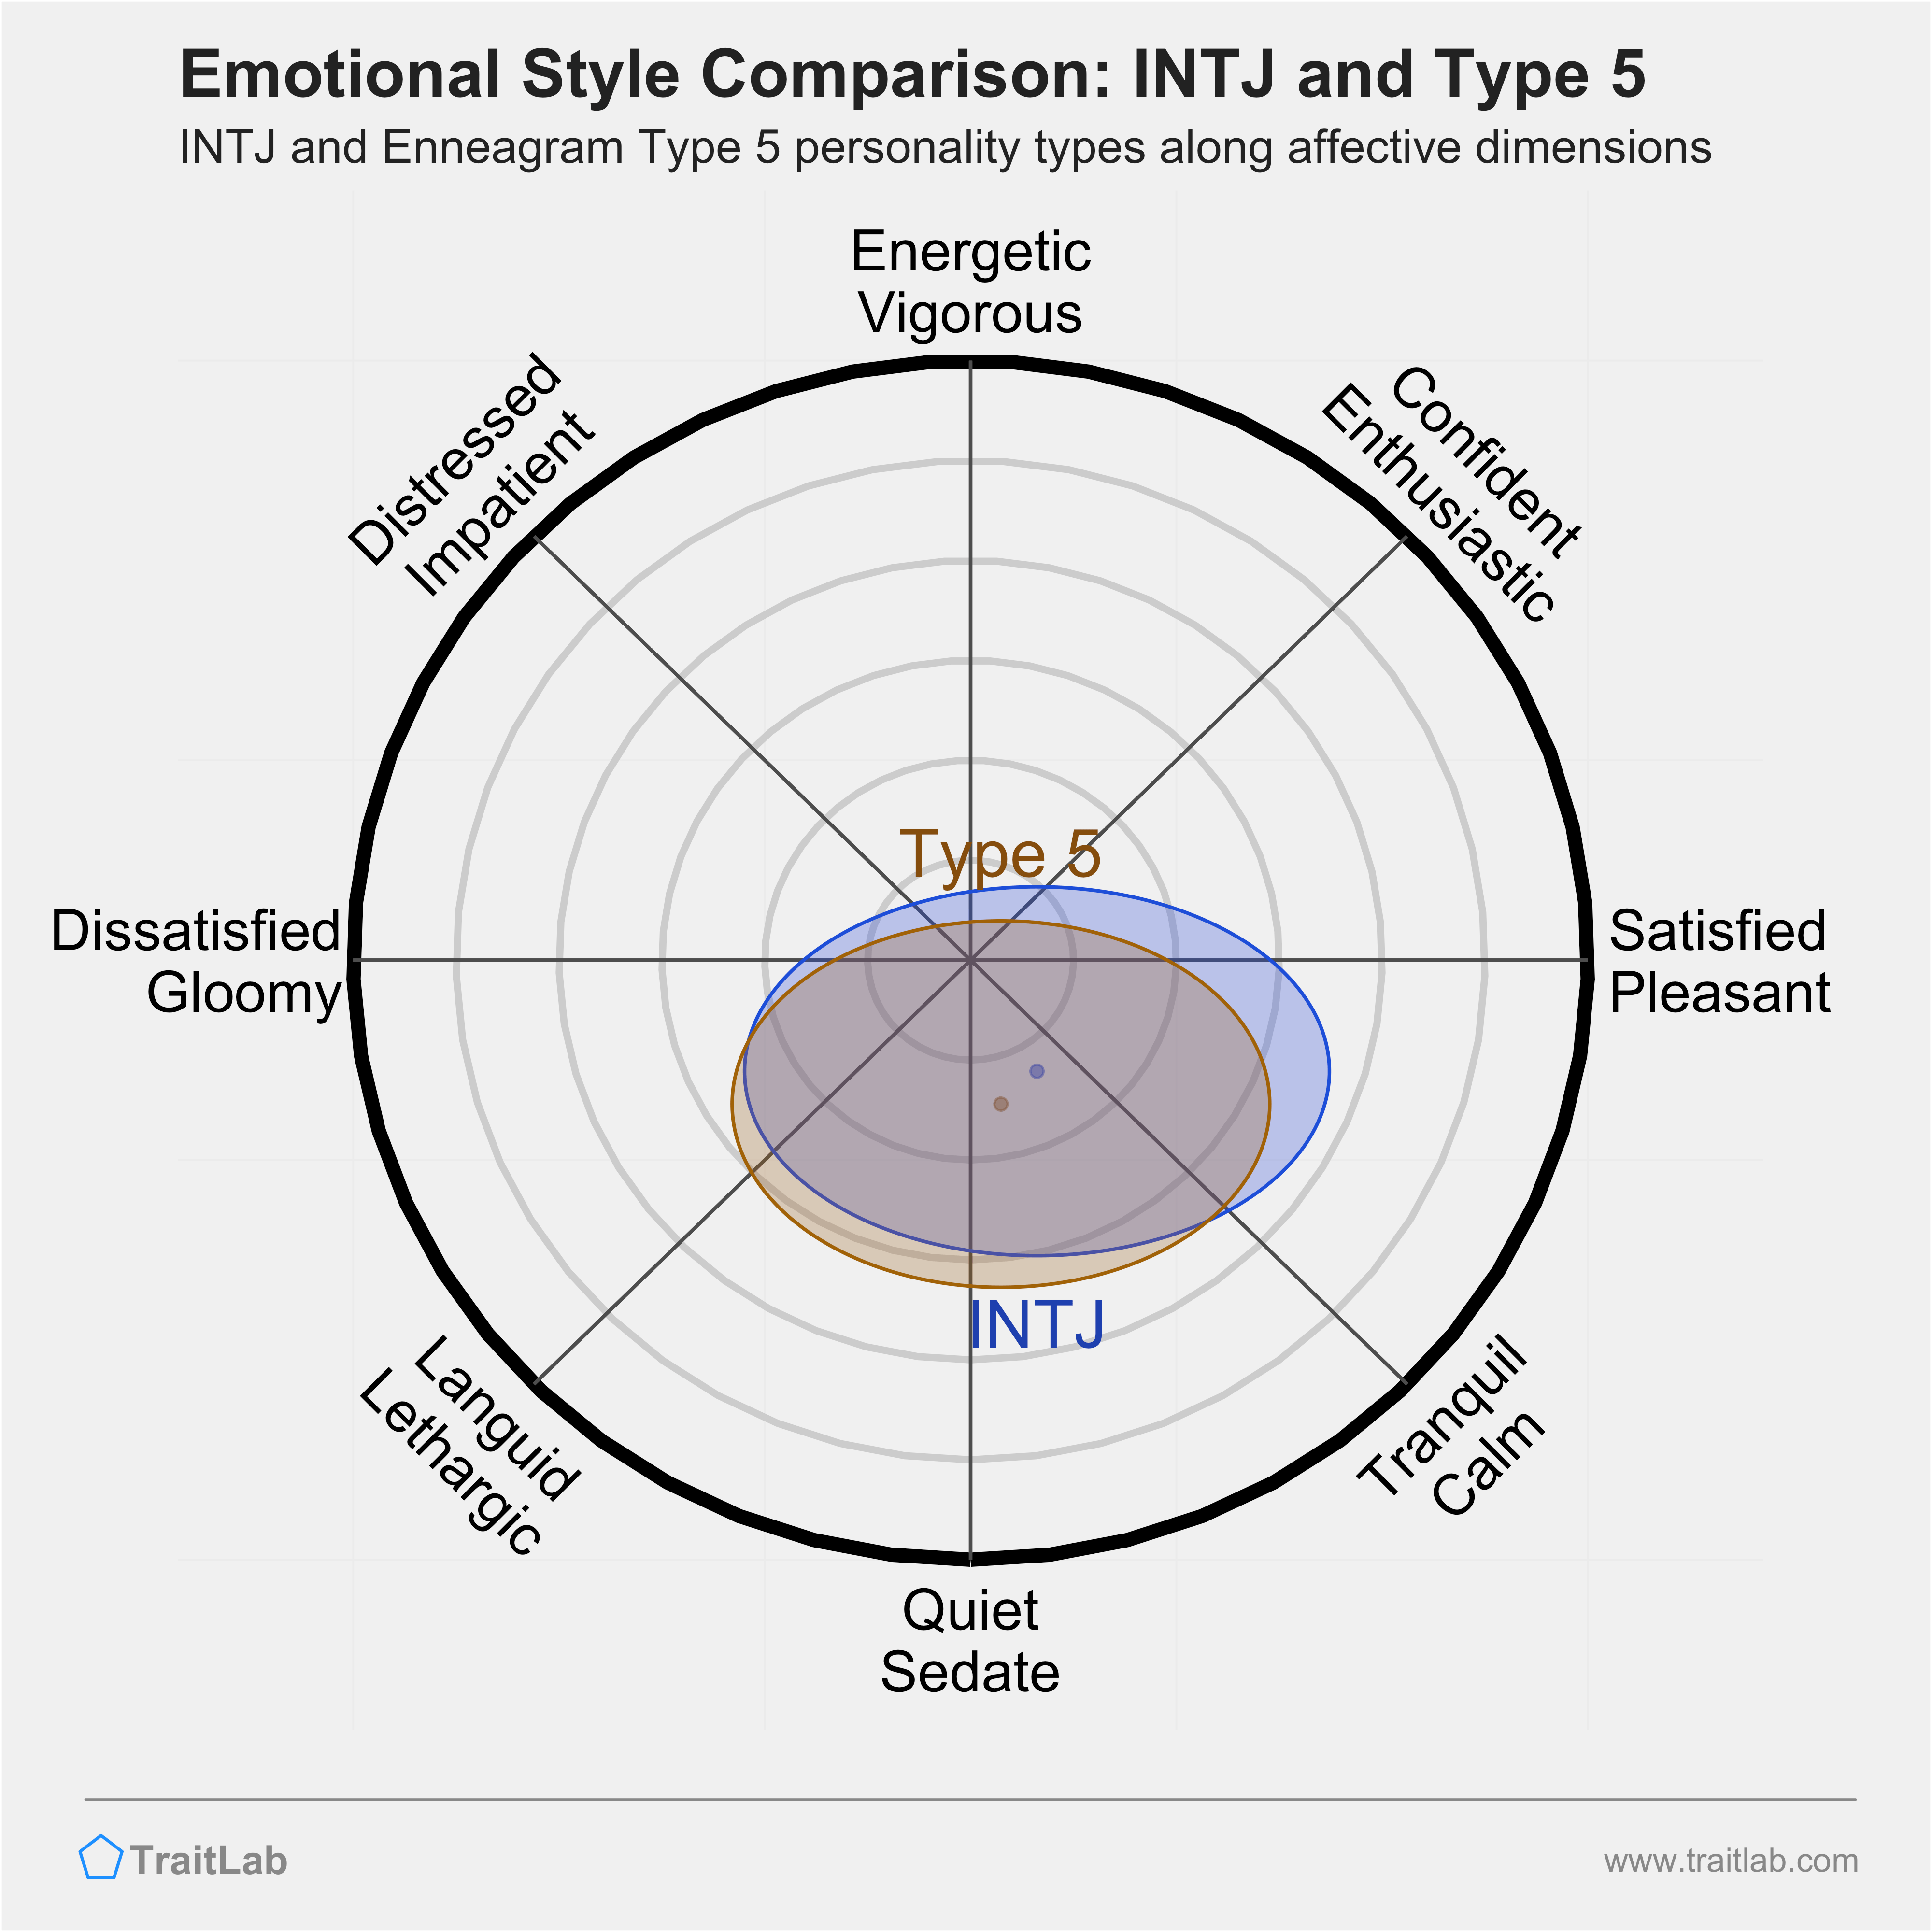 INTJ and Type 5 comparison across emotional (affective) dimensions